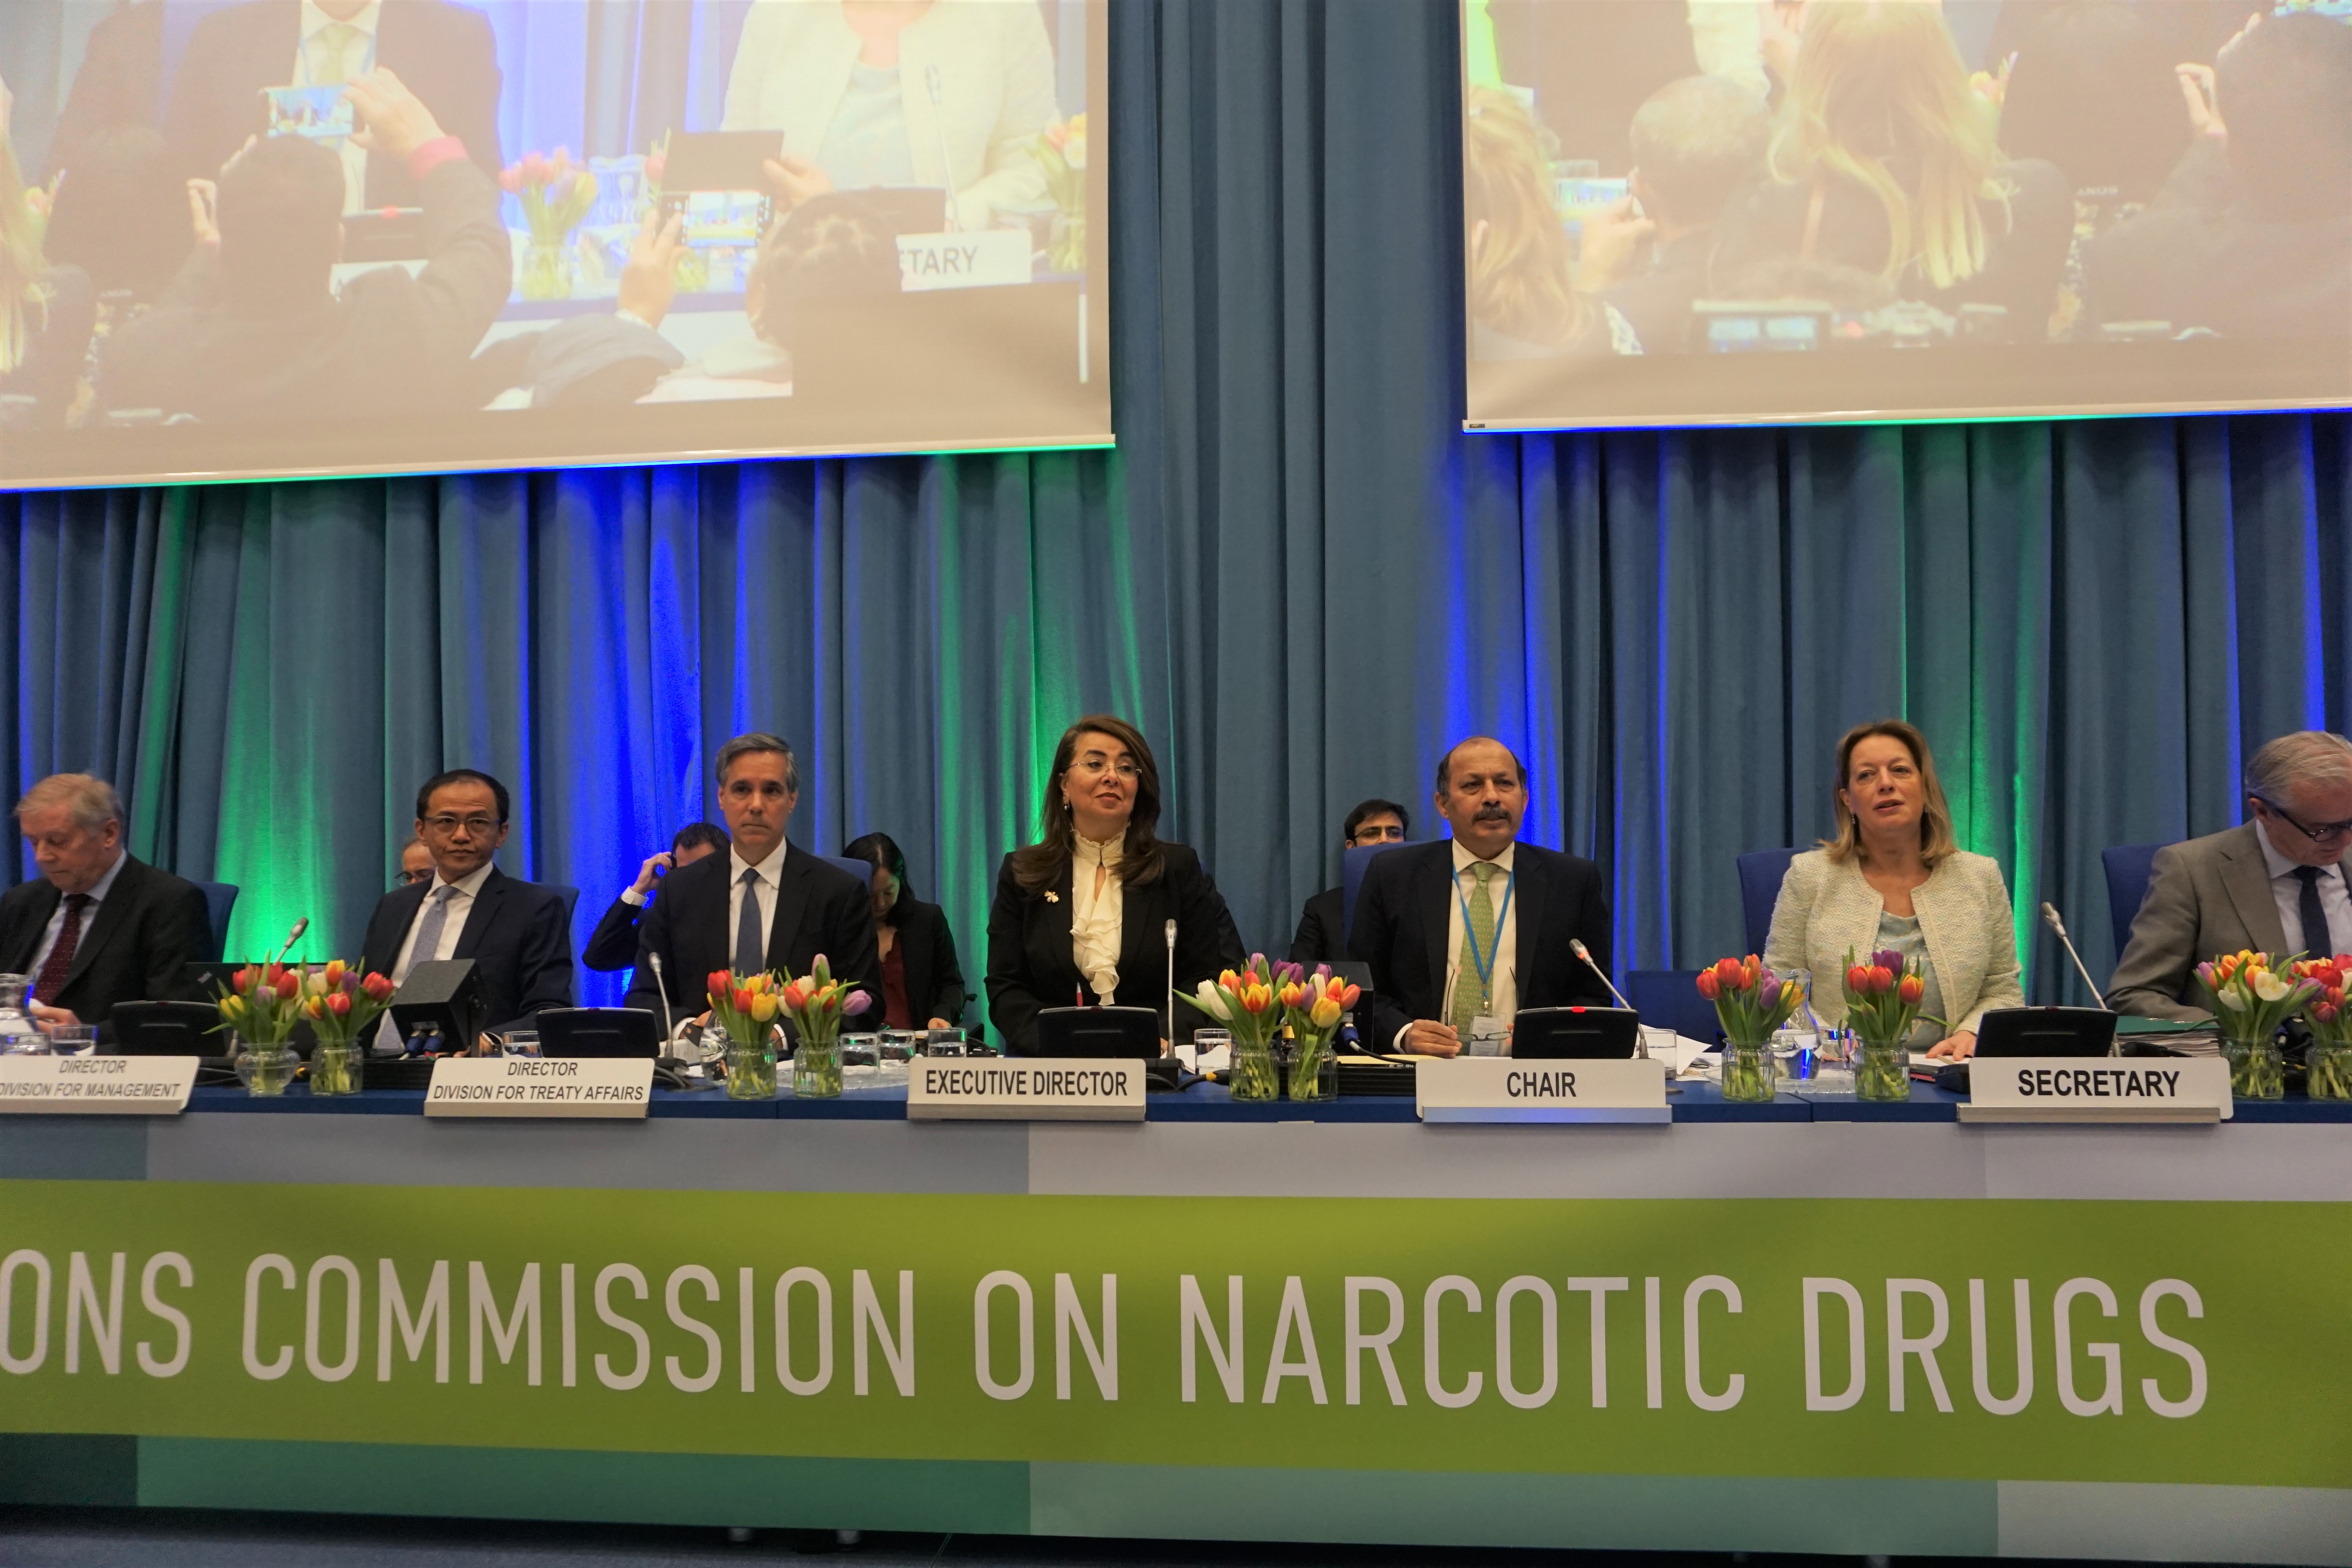 Speakers in formal attire sitting on the podium during the session of the Commission on Narcotic Drugs. The UNODC Executive Director was sitting in the middle of the picture with the Chair and the Secretary on the right side.